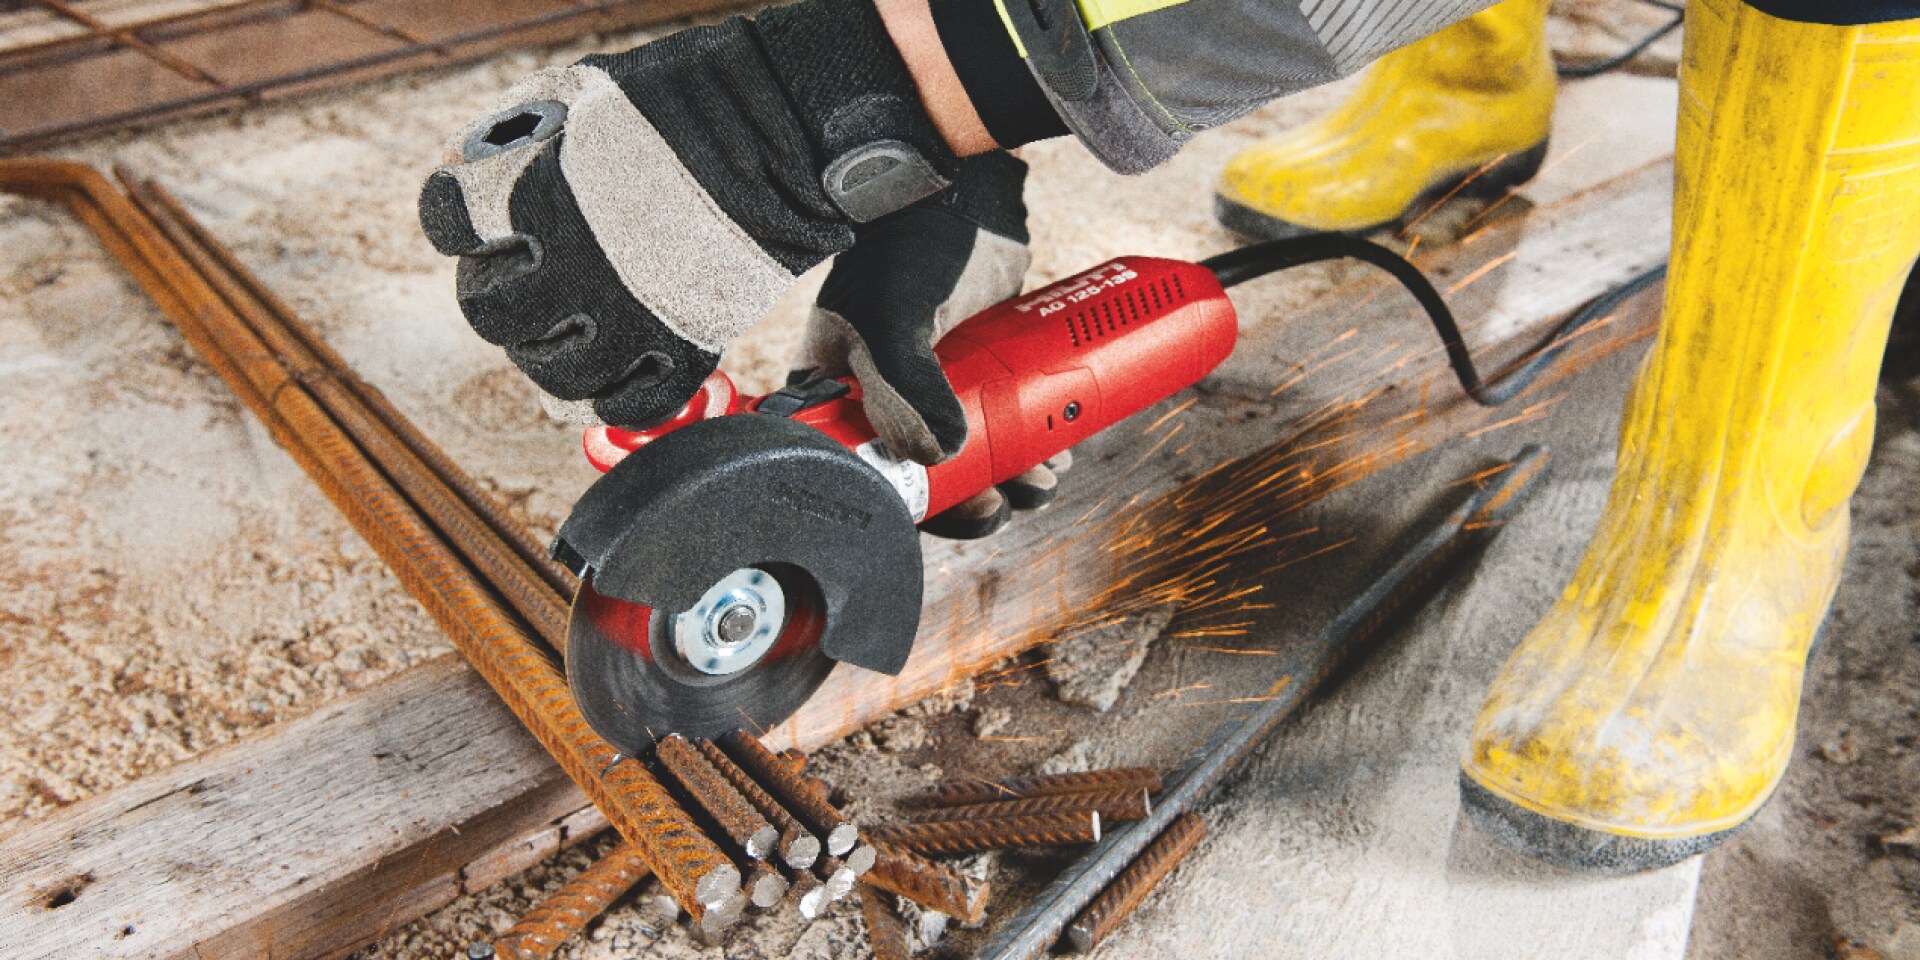 Construction worker using an angle grinder to cut rebar